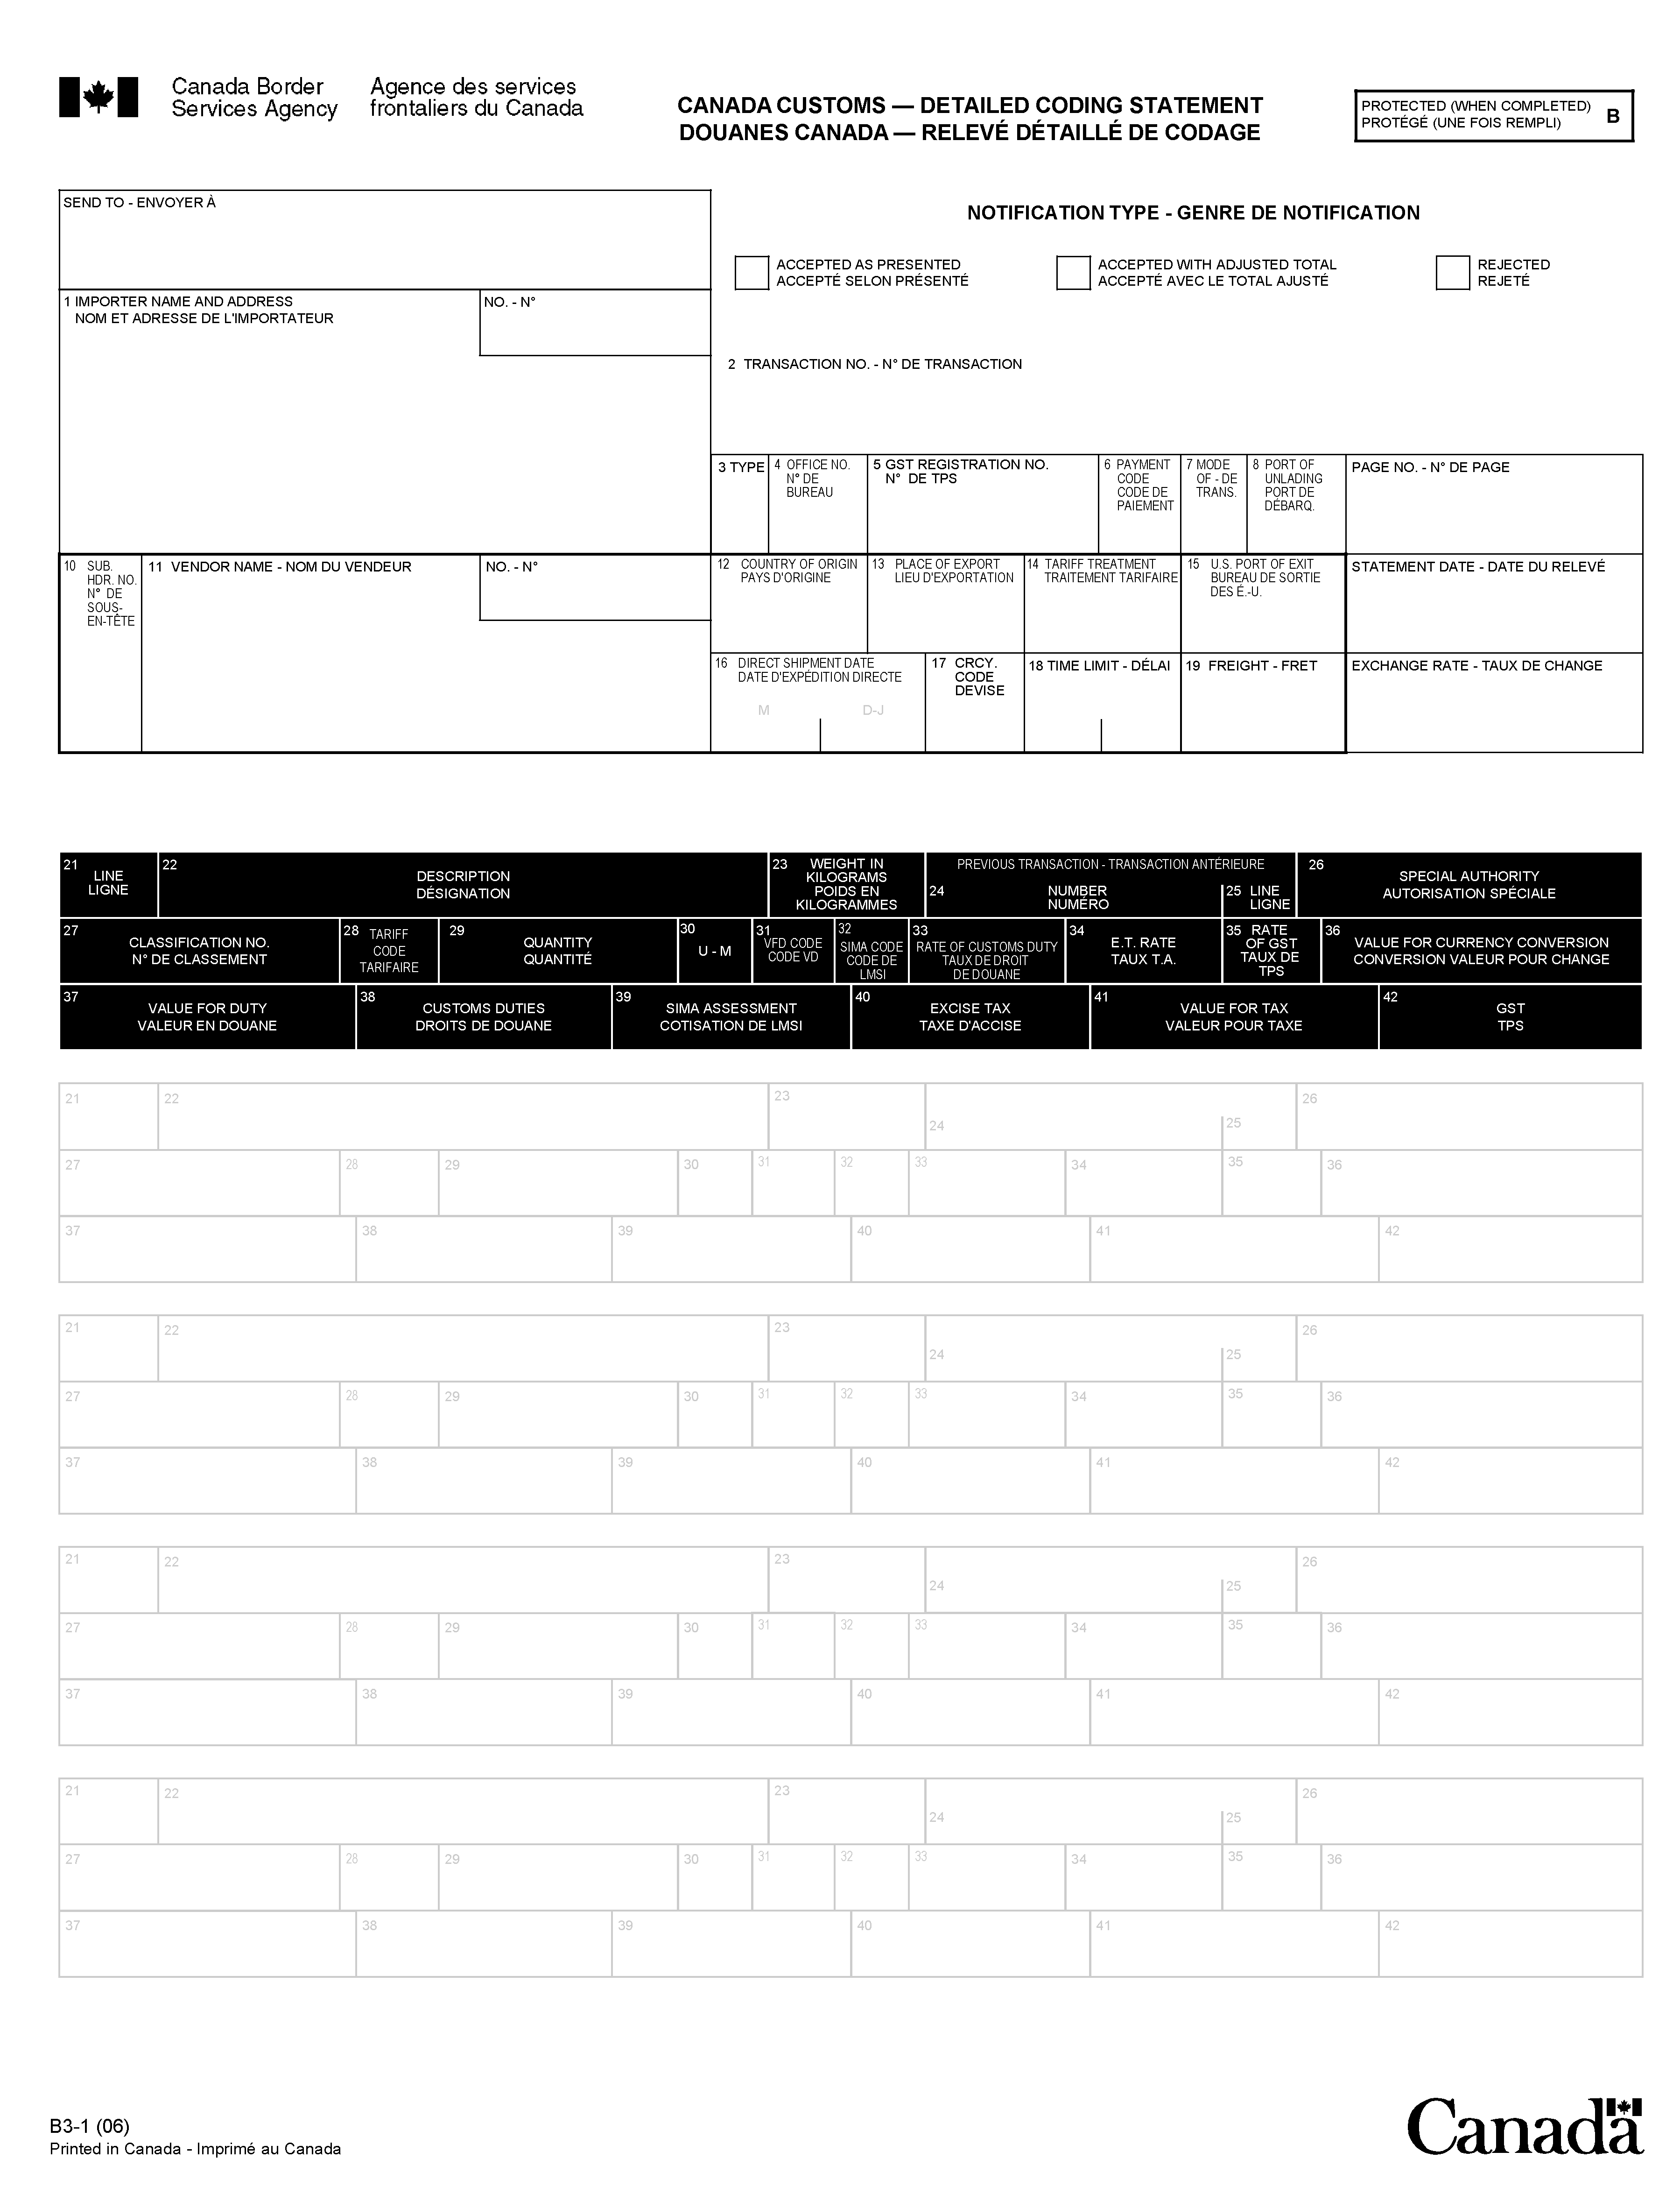 FORM B3-1, CANADA CUSTOMS  –  DETAILED CODING STATEMENT